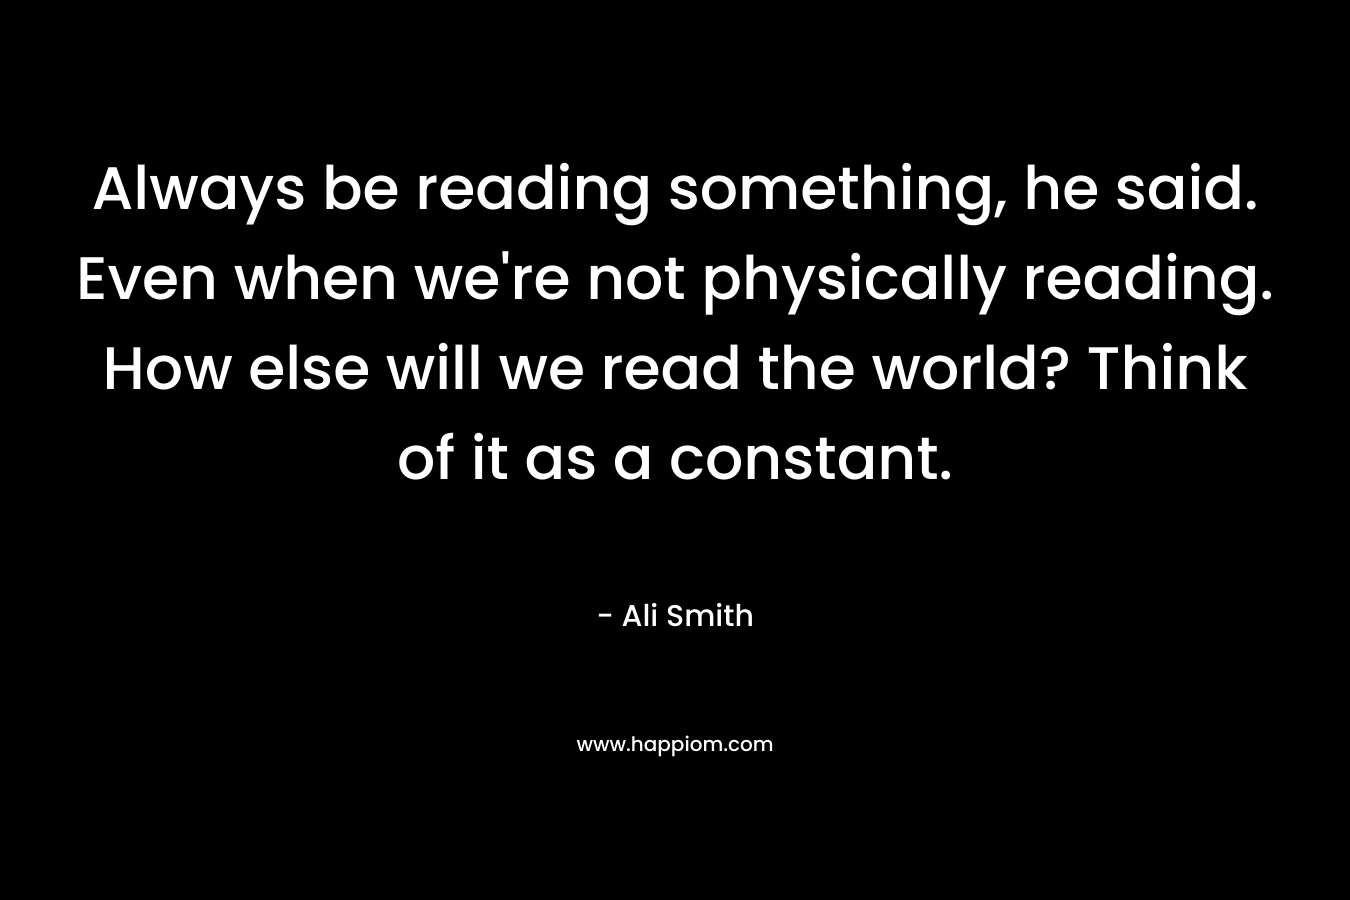 Always be reading something, he said. Even when we're not physically reading. How else will we read the world? Think of it as a constant.